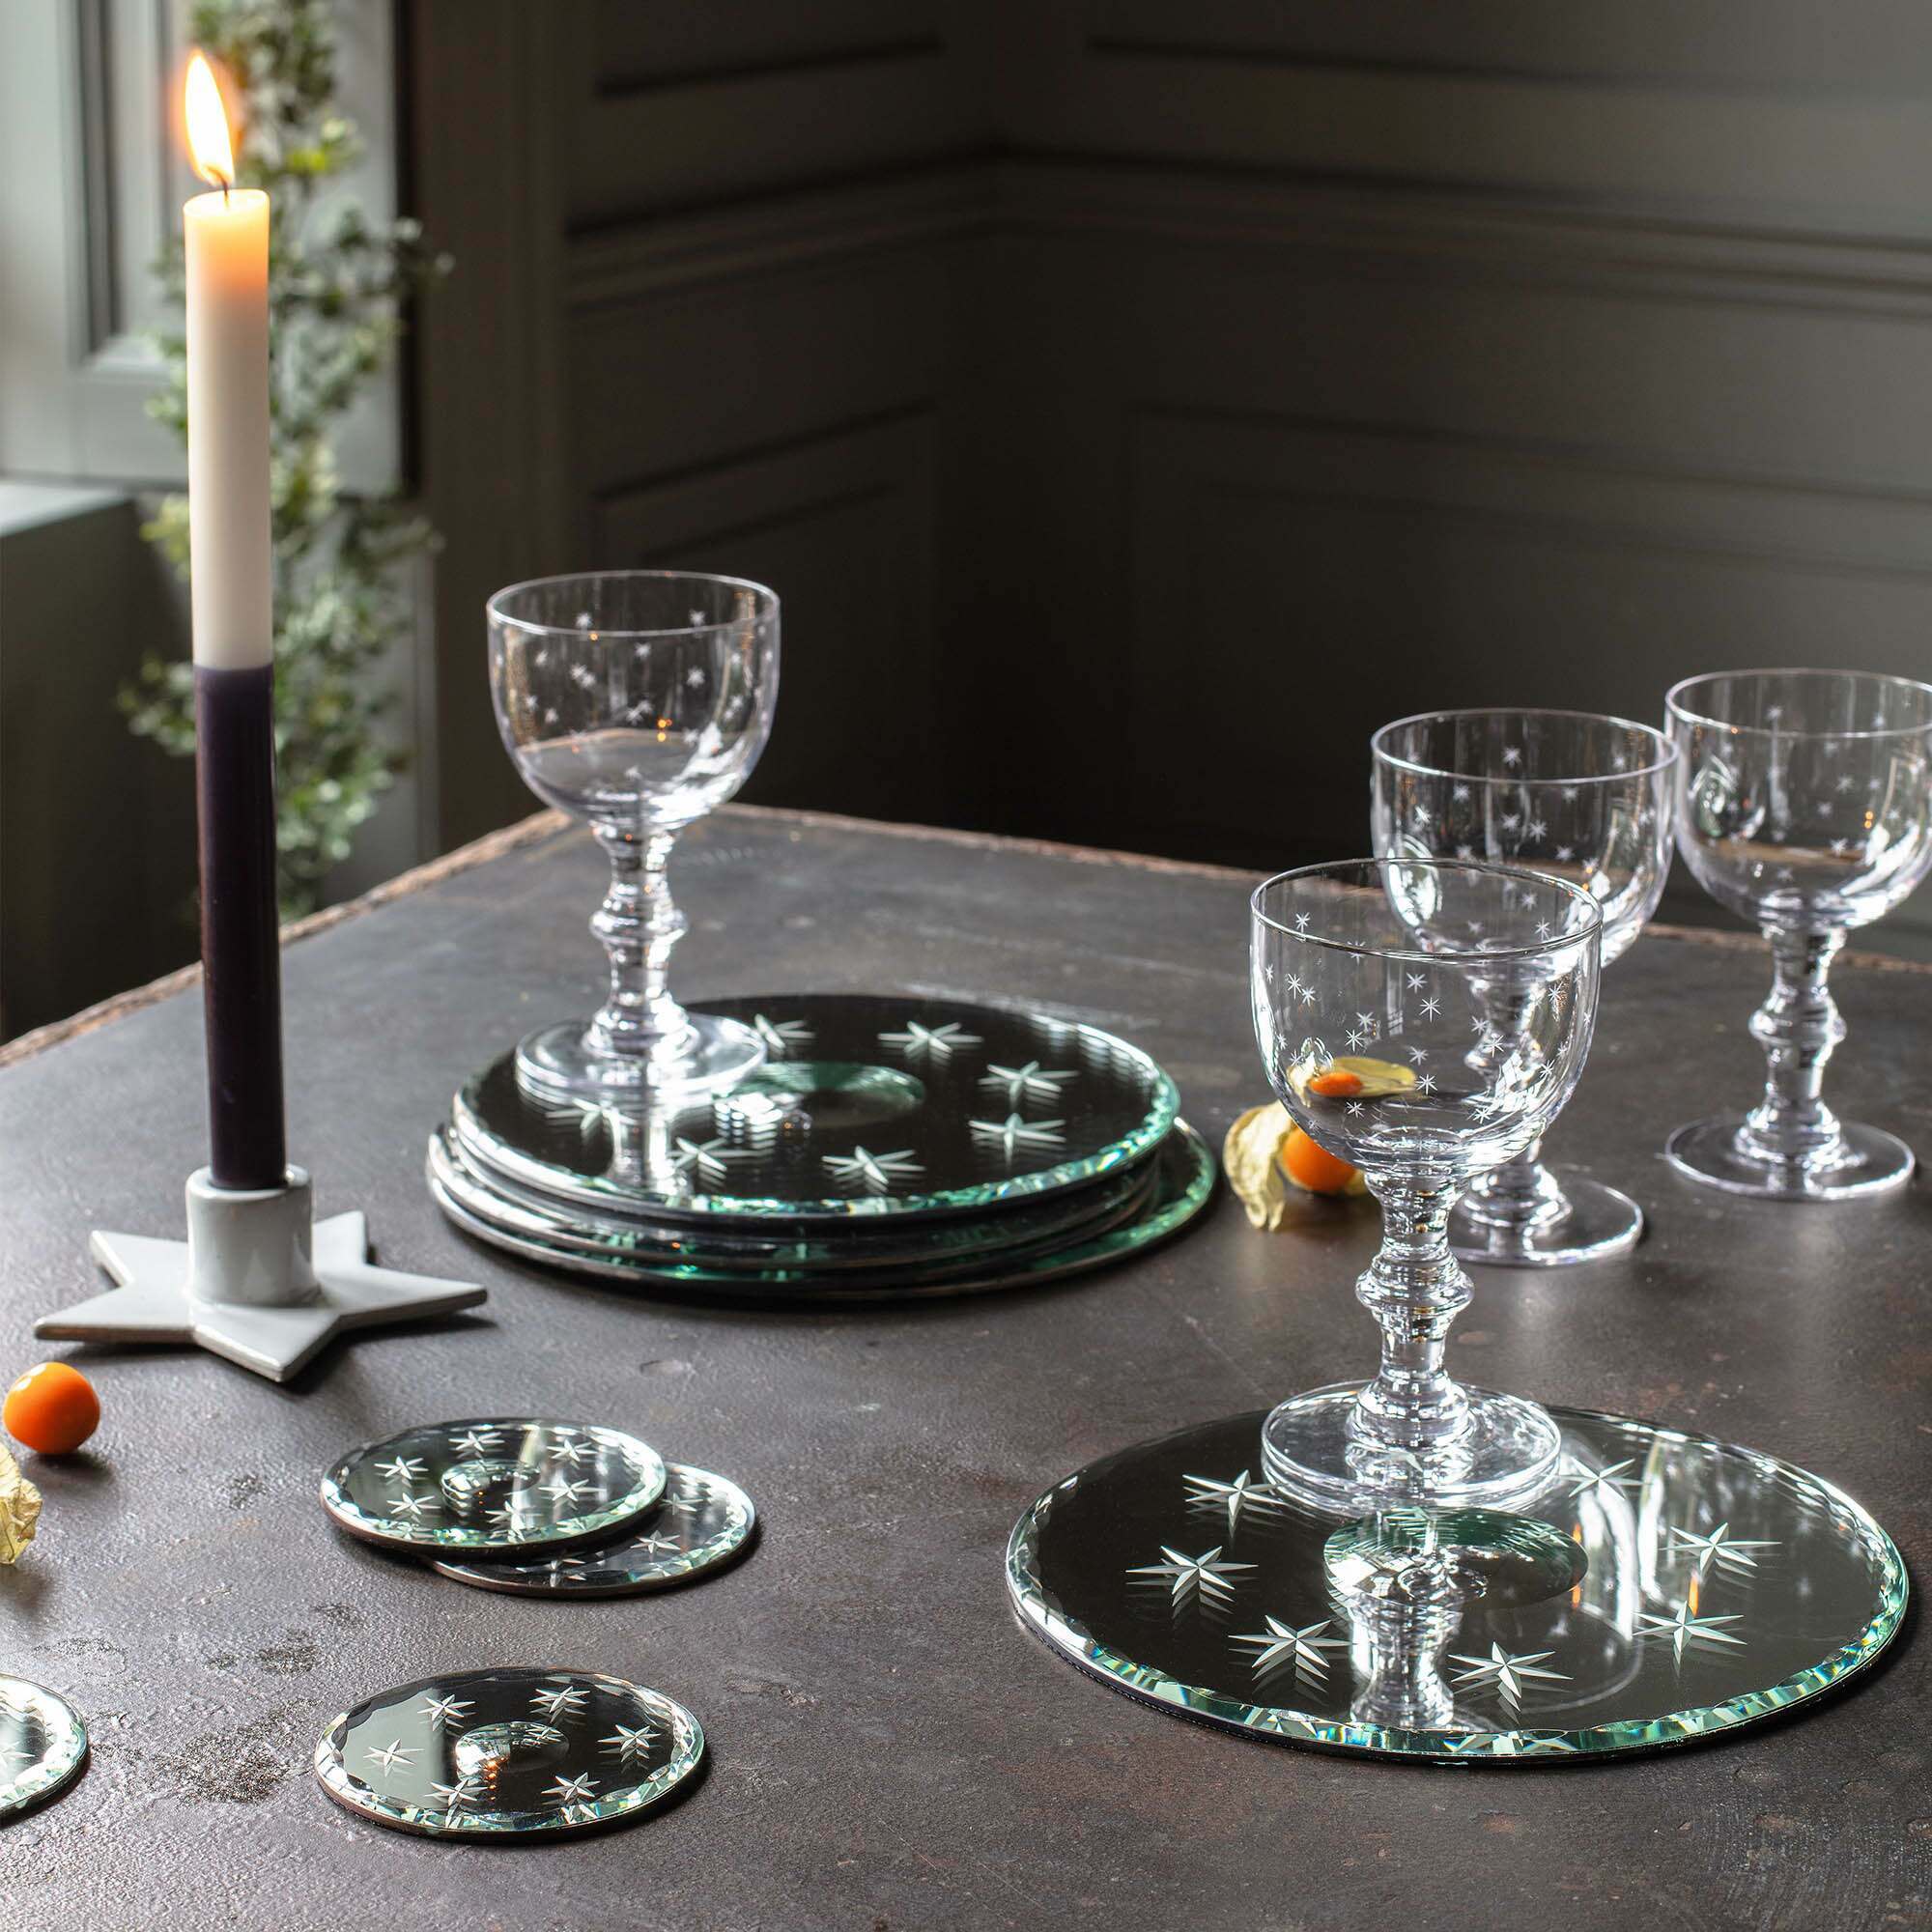 Read more about Graham and green etched mirrored glass star and circle coaster